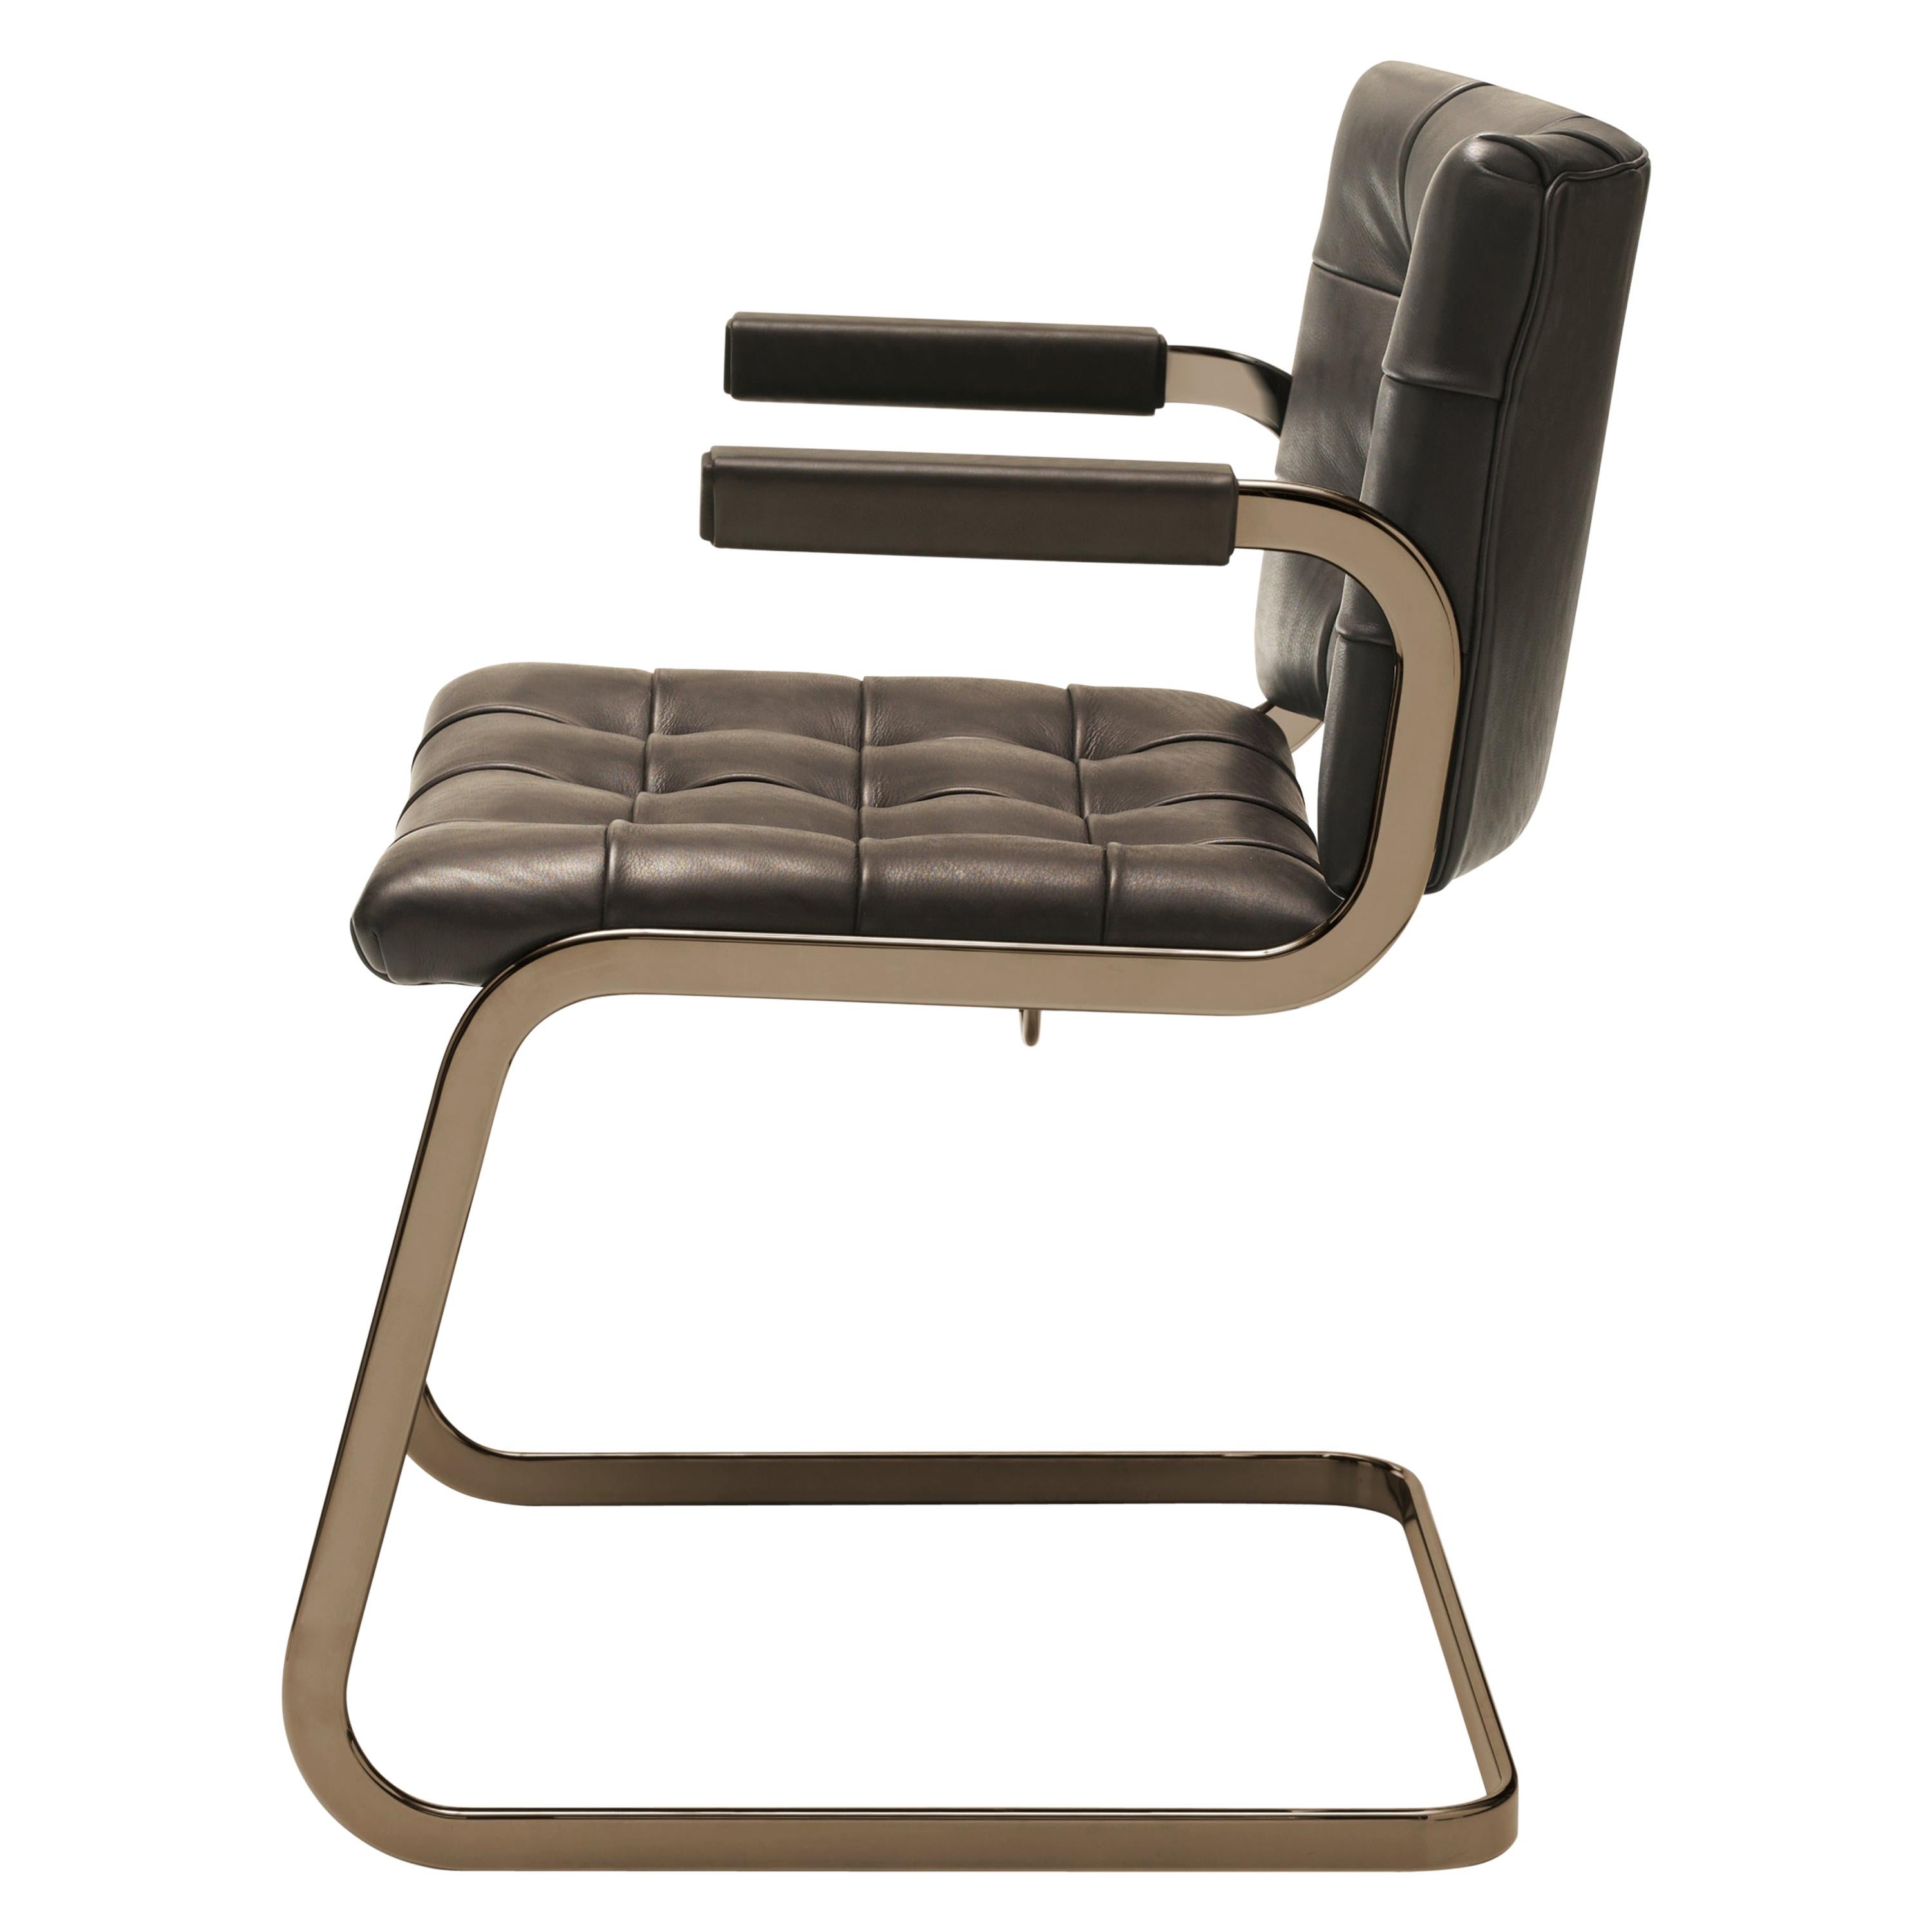 RH-305 Bauhaus Dining Tufted Armchair Leather, Stainless Steel Legs by De Sede